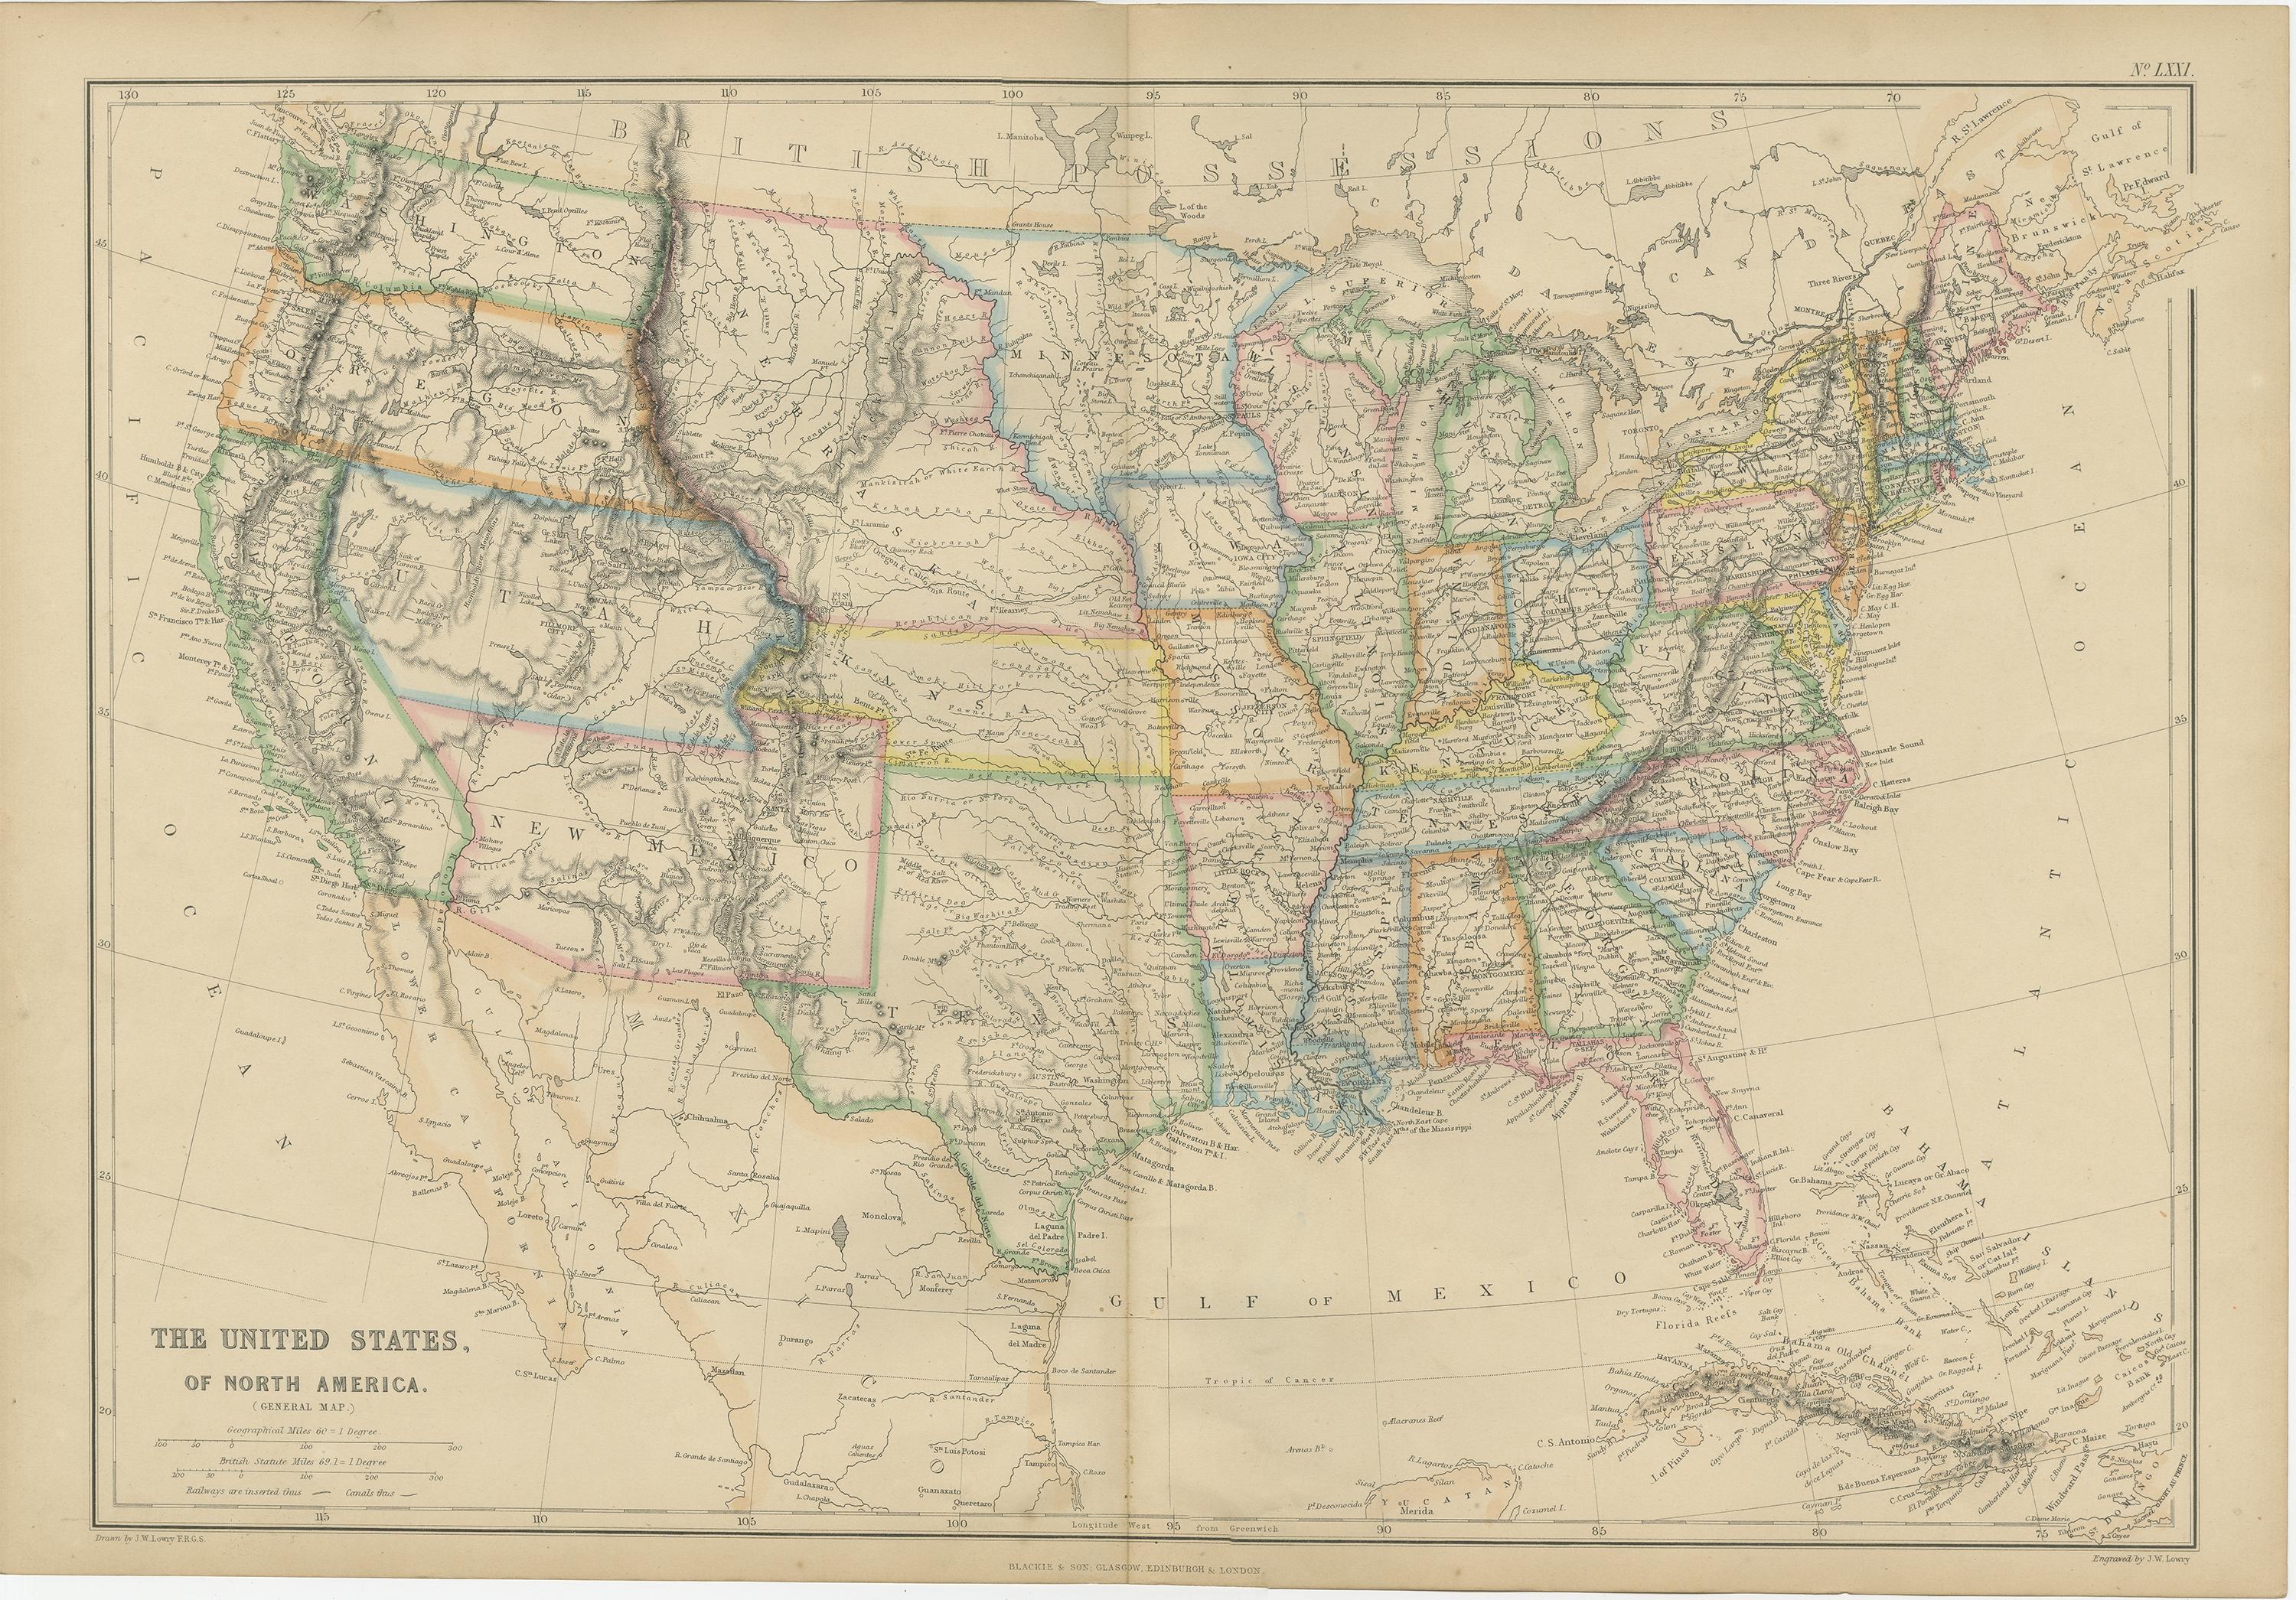 19th Century Antique Map of the United States of North America by W. G. Blackie, 1859